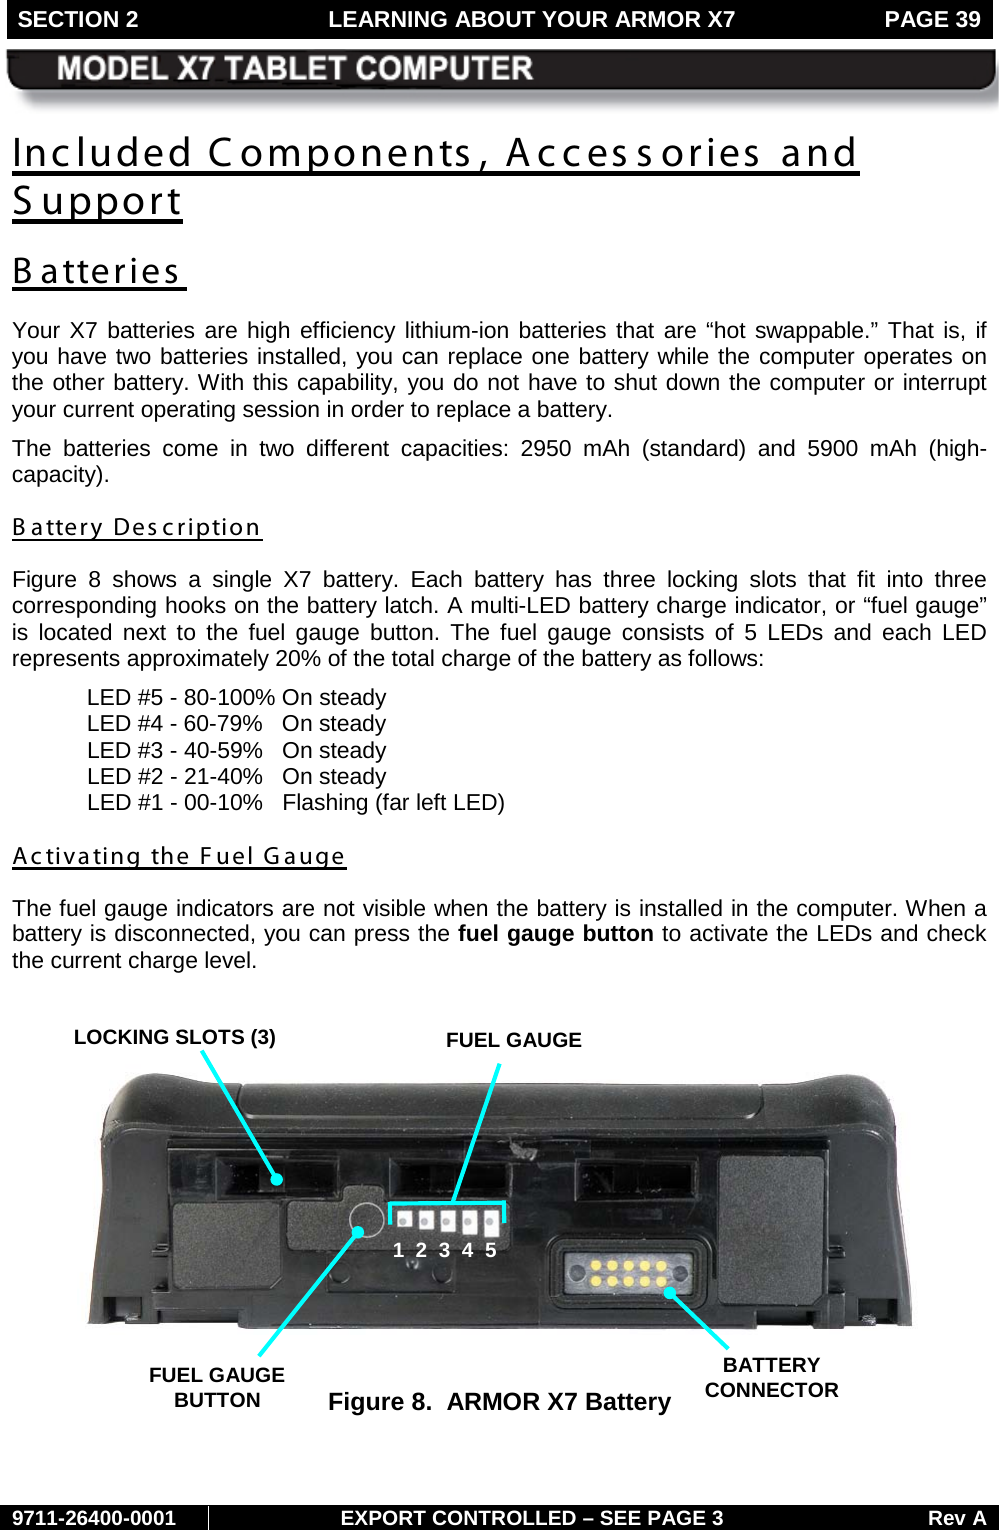 SECTION 2 LEARNING ABOUT YOUR ARMOR X7  PAGE 39        9711-26400-0001 EXPORT CONTROLLED – SEE PAGE 3 Rev A Included Components, Accessories and S upport B atteries Your X7 batteries are high efficiency lithium-ion batteries that are “hot swappable.” That is, if you have two batteries installed, you can replace one battery while the computer operates on the other battery. With this capability, you do not have to shut down the computer or interrupt your current operating session in order to replace a battery.  The batteries come in two different capacities: 2950 mAh (standard) and 5900 mAh (high-capacity).   B attery Des cription Figure  8  shows a single X7 battery. Each battery has three locking slots that fit into three corresponding hooks on the battery latch. A multi-LED battery charge indicator, or “fuel gauge” is located  next to the fuel gauge button.  The fuel gauge consists of 5 LEDs and each LED represents approximately 20% of the total charge of the battery as follows: LED #5 - 80-100% On steady LED #4 - 60-79%   On steady LED #3 - 40-59%   On steady LED #2 - 21-40%   On steady LED #1 - 00-10%   Flashing (far left LED) Ac tivating the Fuel Gauge The fuel gauge indicators are not visible when the battery is installed in the computer. When a battery is disconnected, you can press the fuel gauge button to activate the LEDs and check the current charge level.     Figure 8.  ARMOR X7 Battery   FUEL GAUGE  BUTTON FUEL GAUGE  BATTERY CONNECTOR 1  2  3  4  5 LOCKING SLOTS (3)  